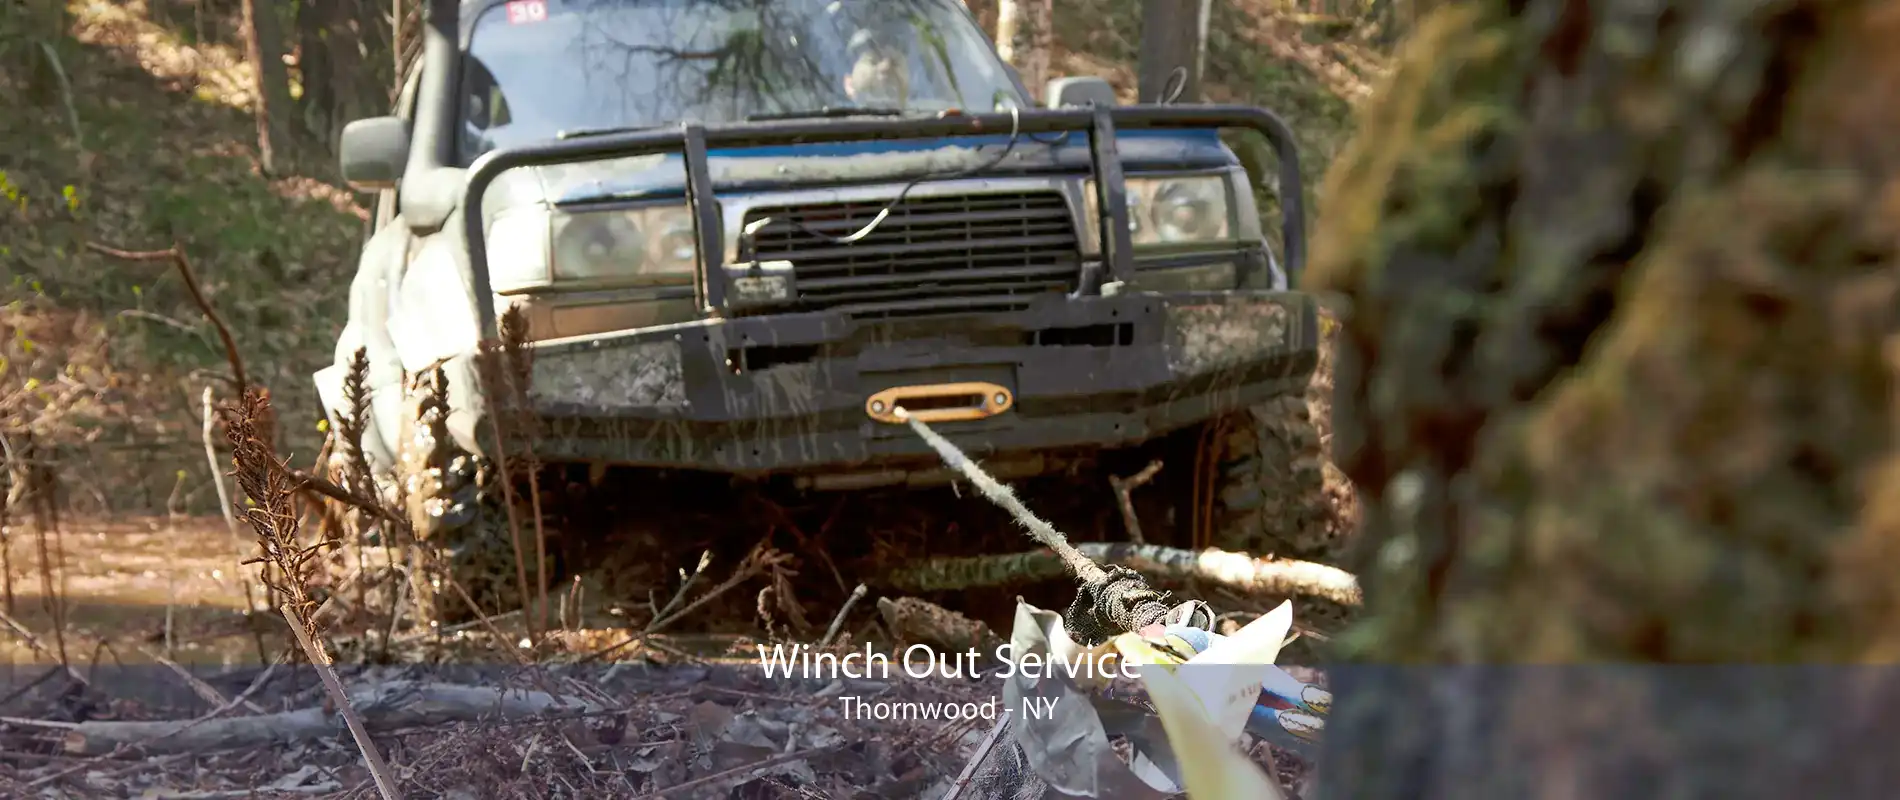 Winch Out Service Thornwood - NY